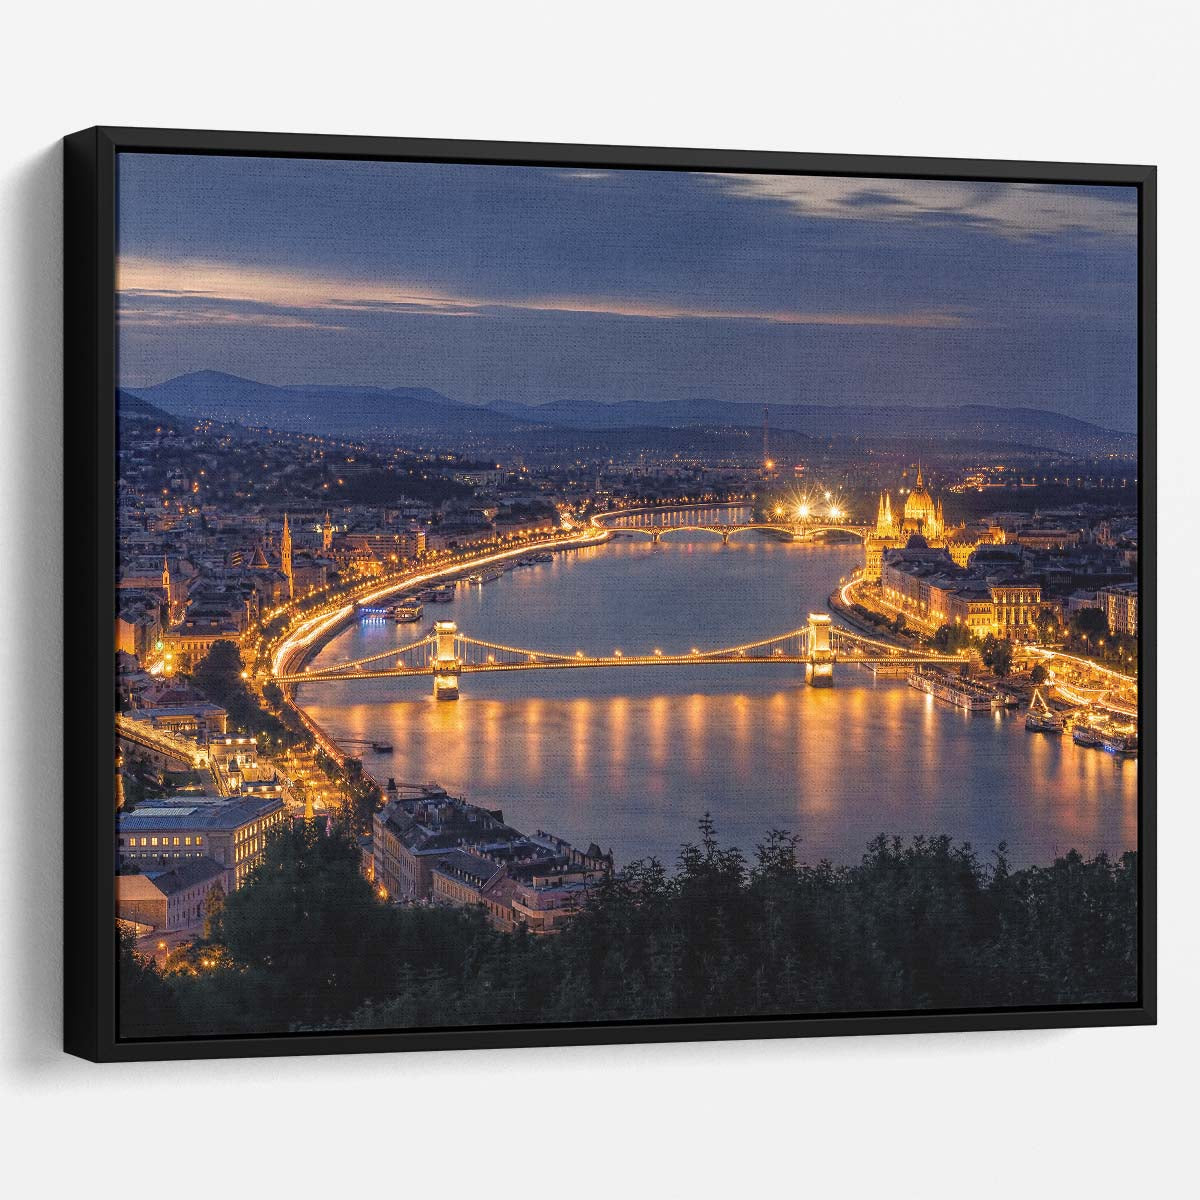 Budapest Sunset Skyline & Bridges Panoramic Wall Art by Luxuriance Designs. Made in USA.